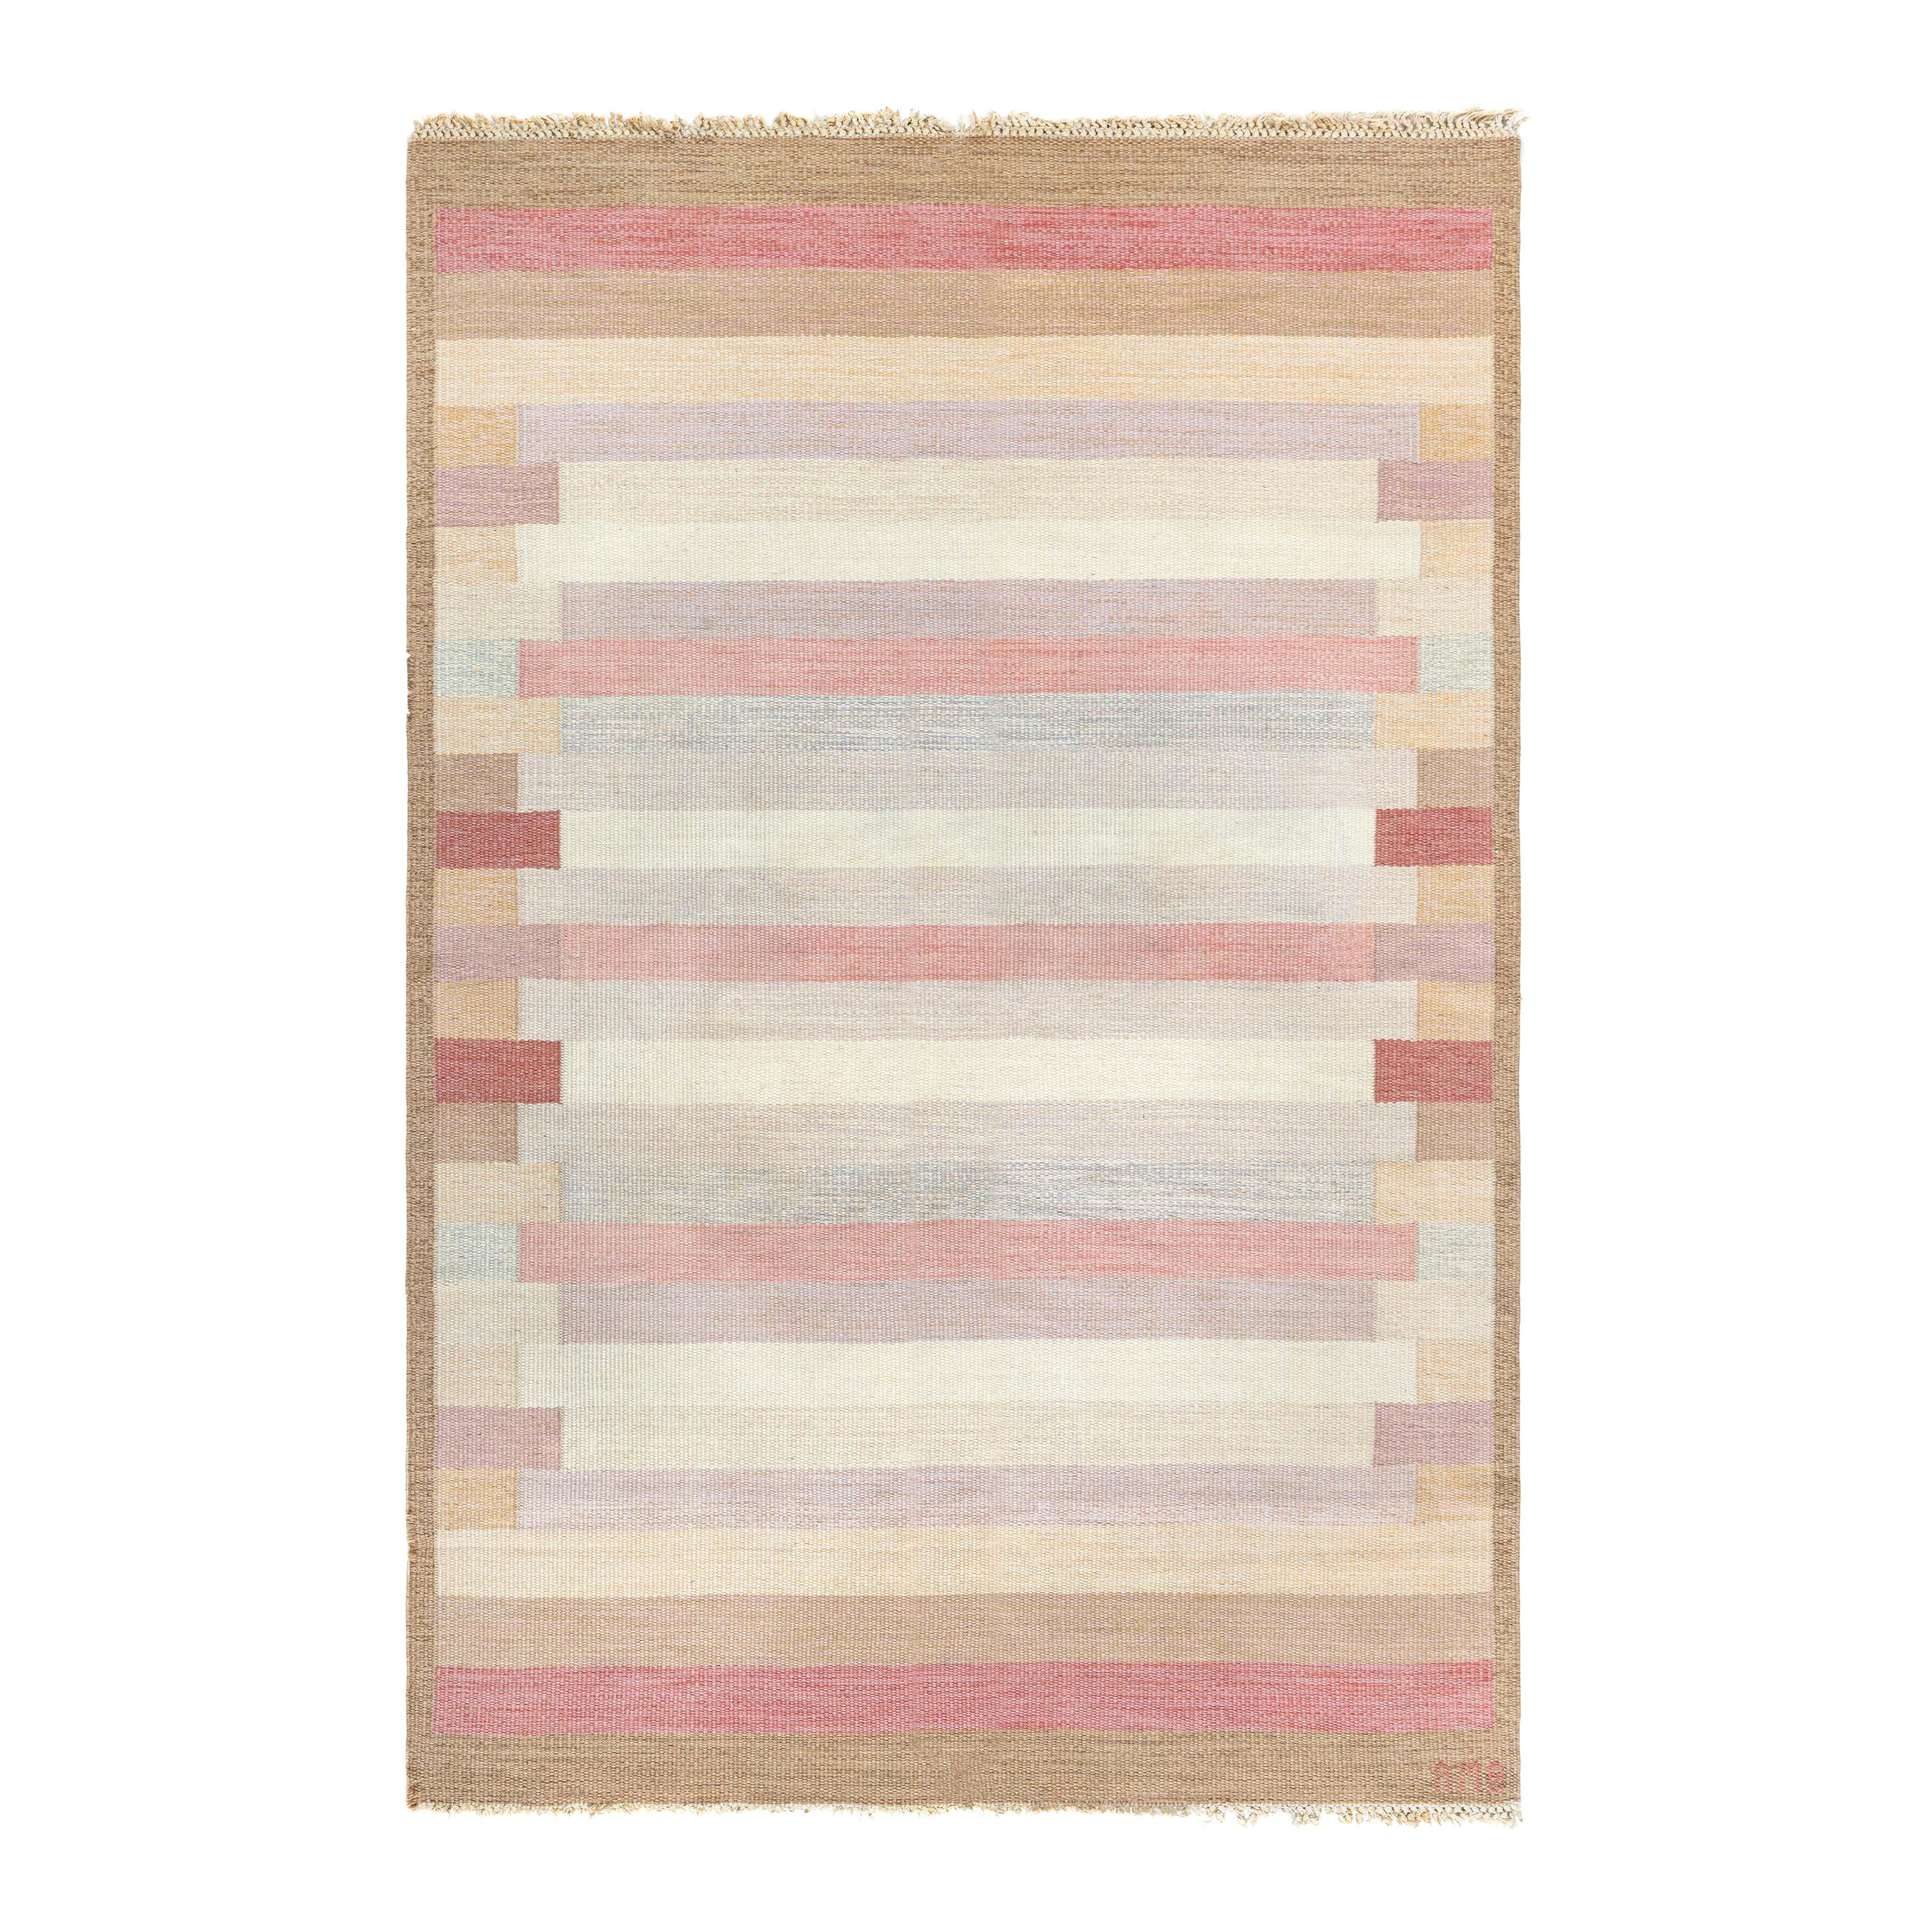 Mid-20th century Swedish Flat-Weave Rug For Sale